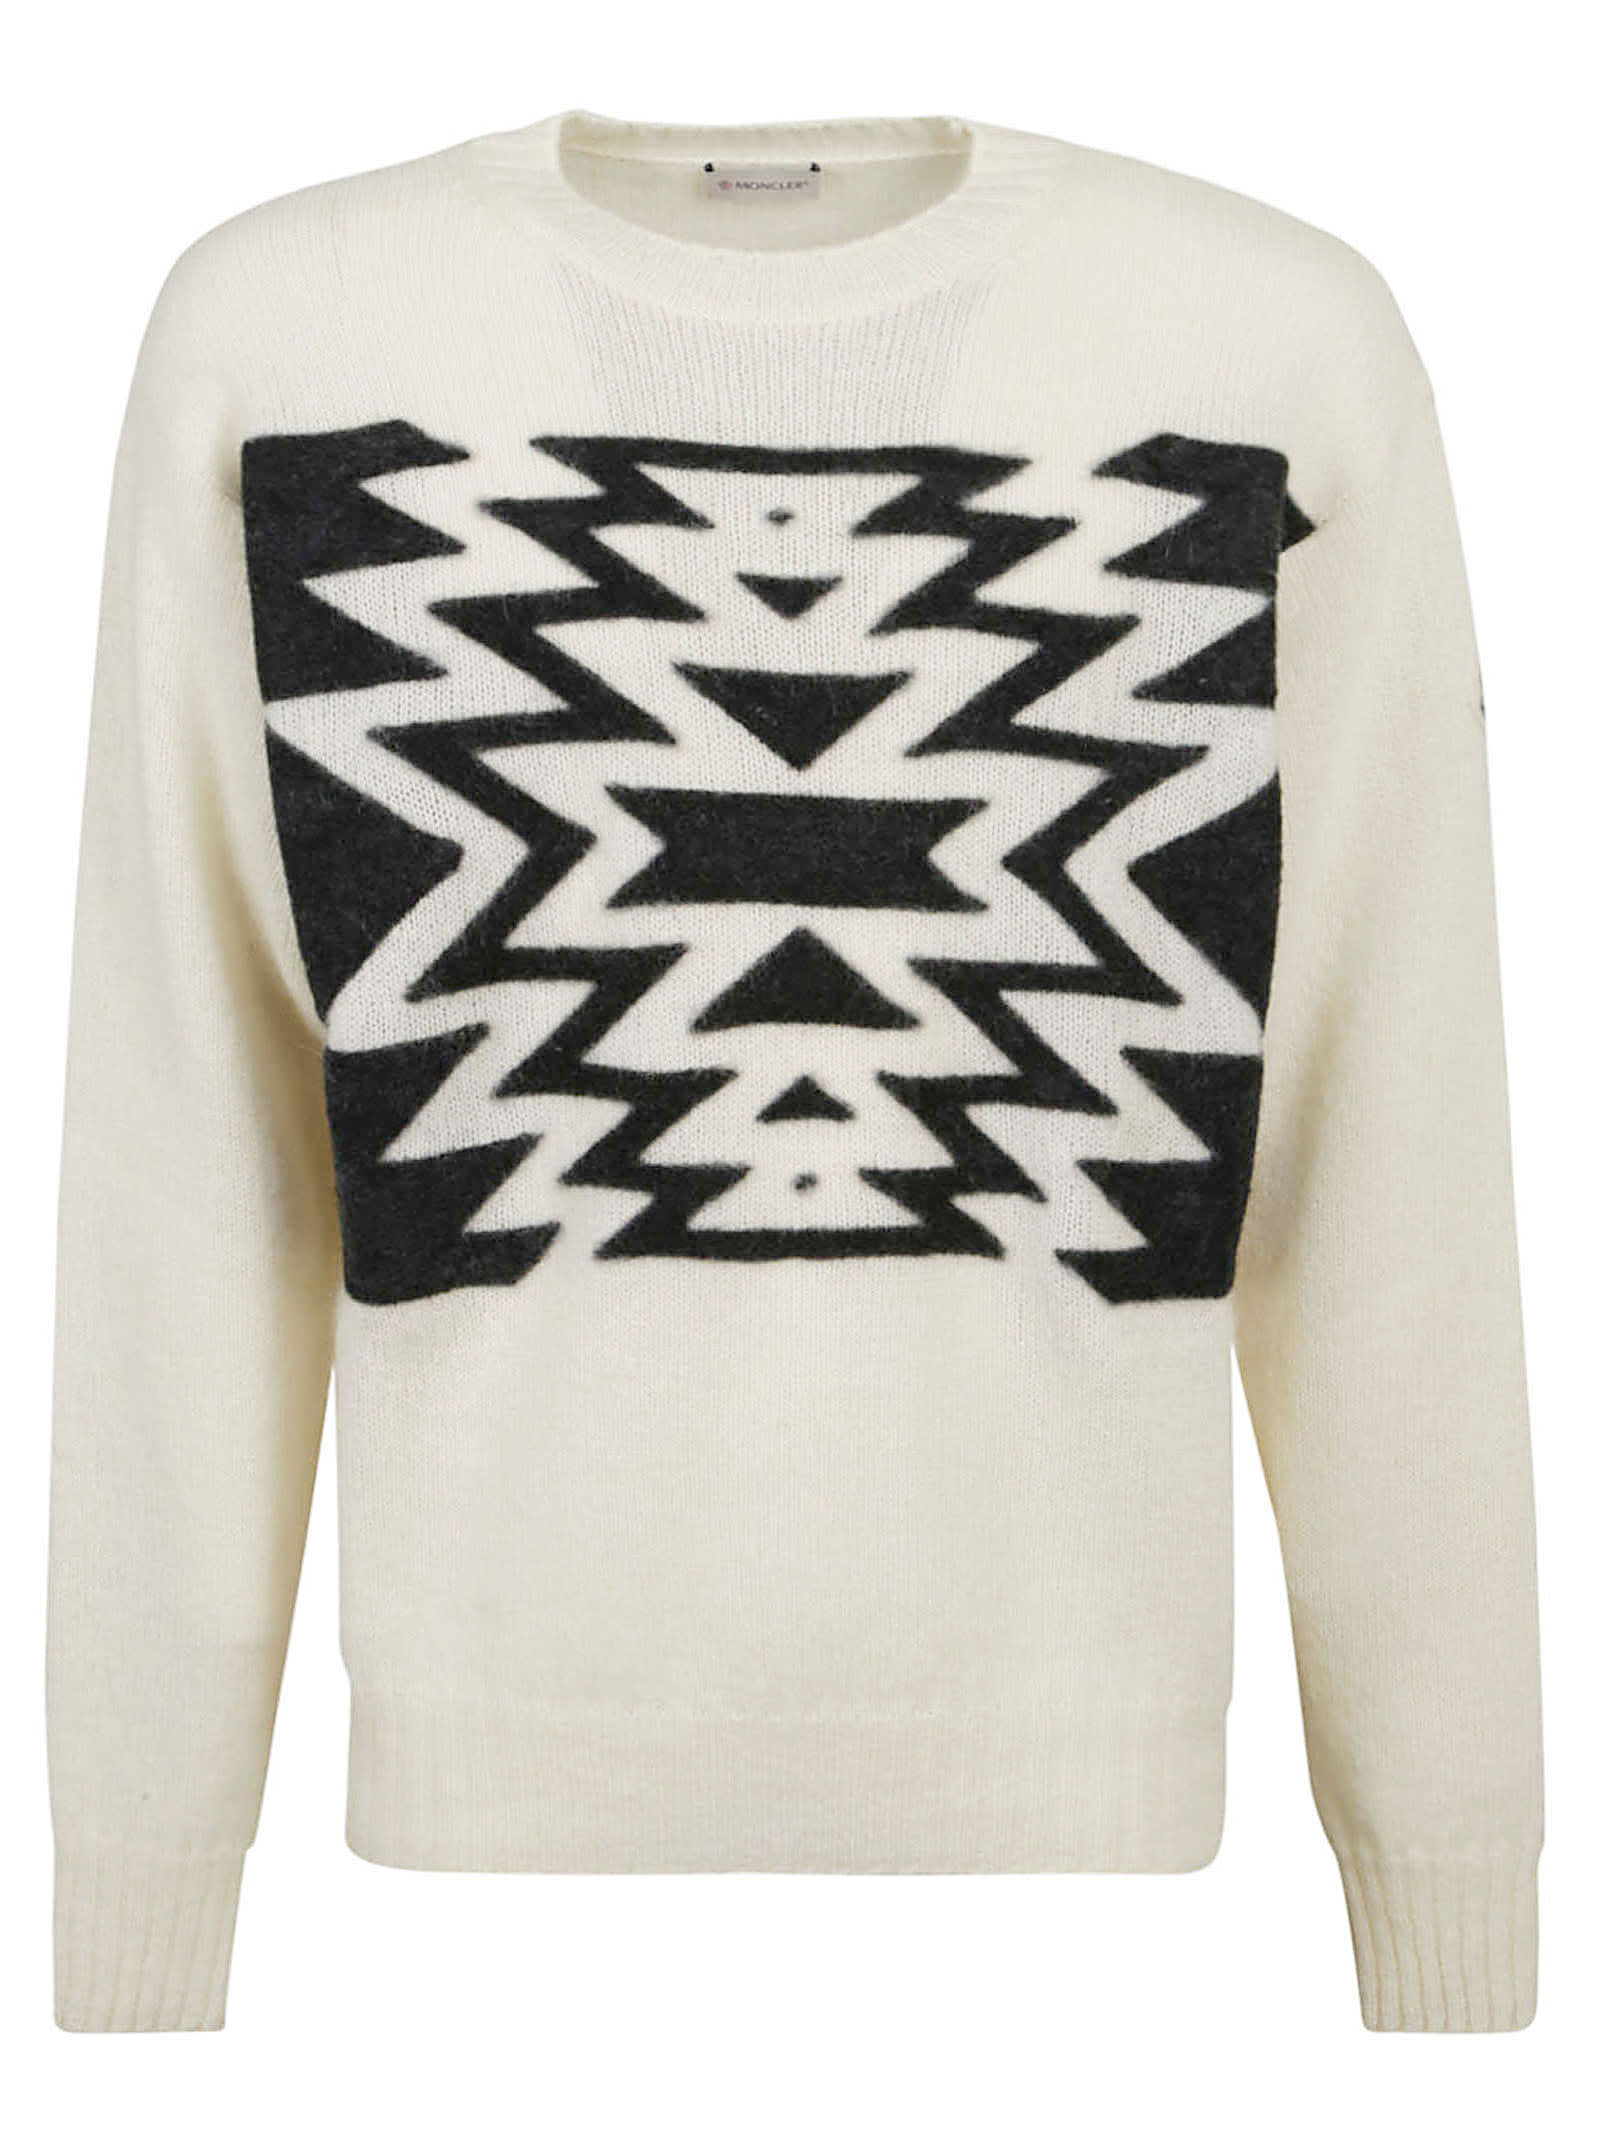 Moncler Embroidered Rib Knit Sweater